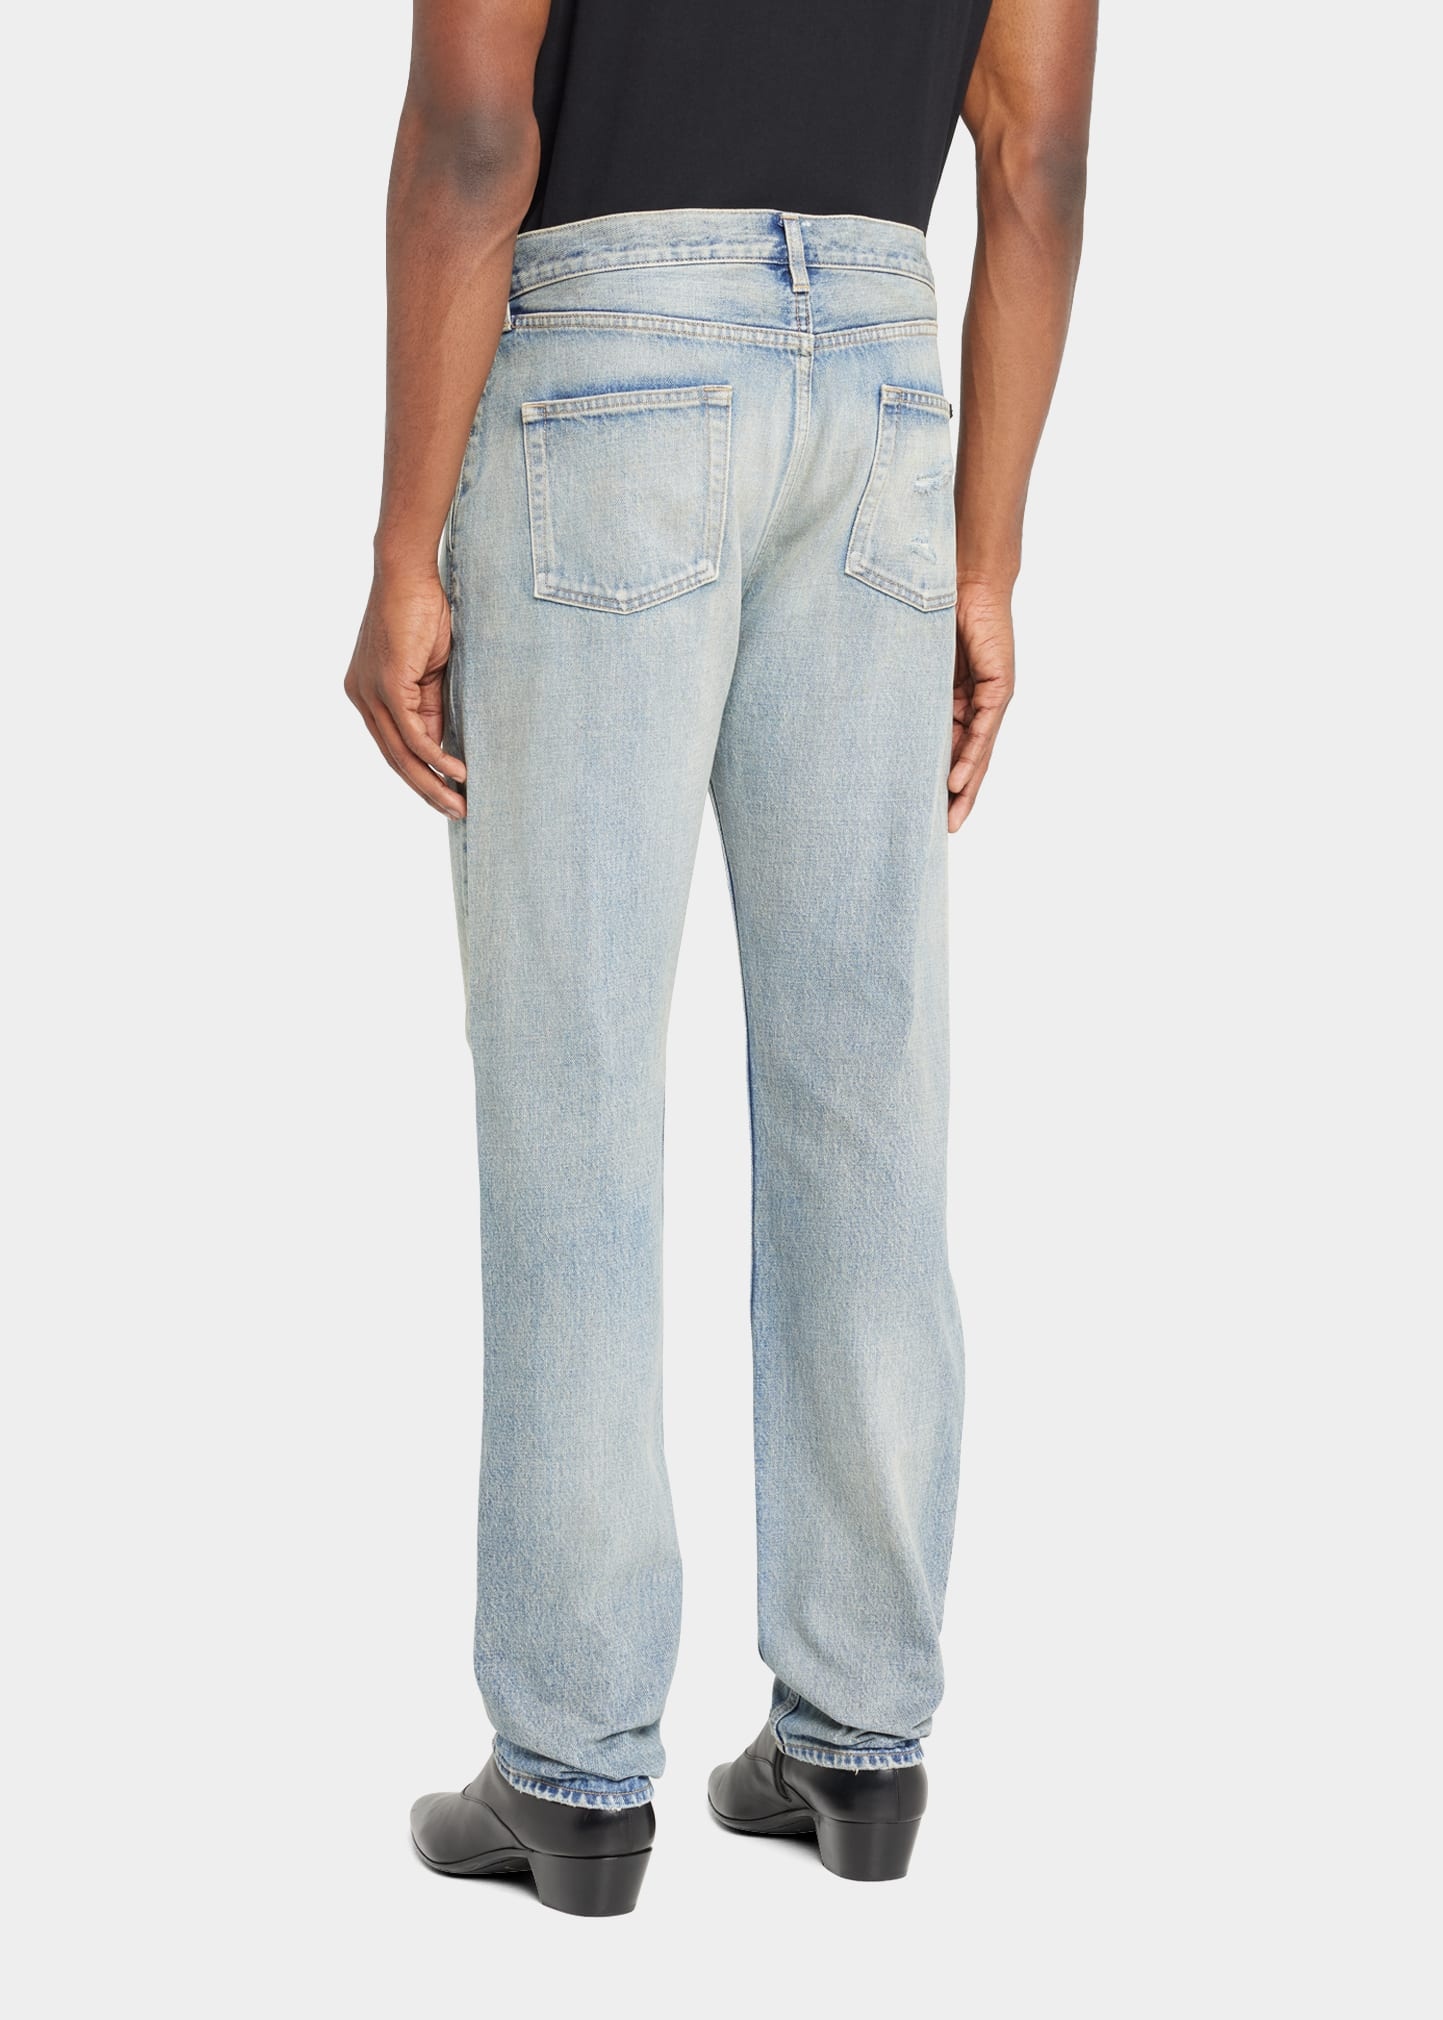 Men's Distressed Relaxed-Fit Jeans - 3